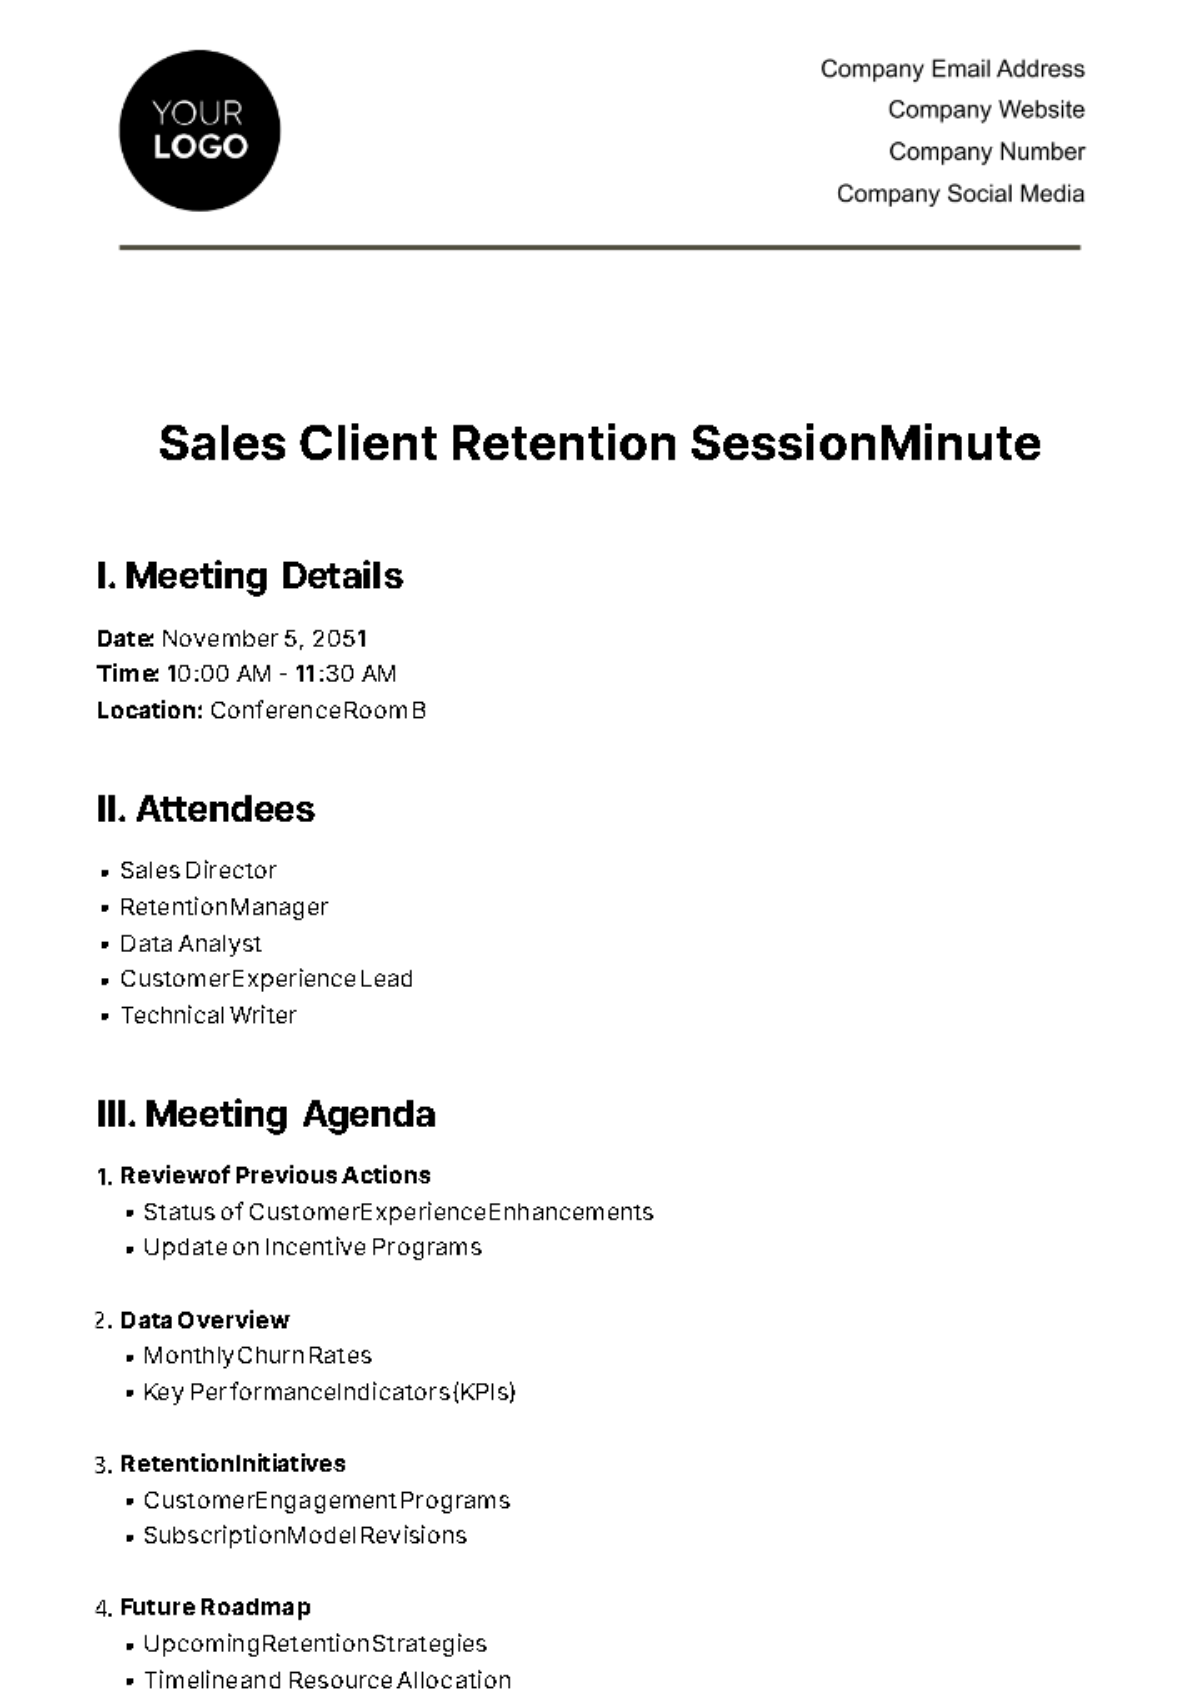 Free Sales Client Retention Session Minute Template